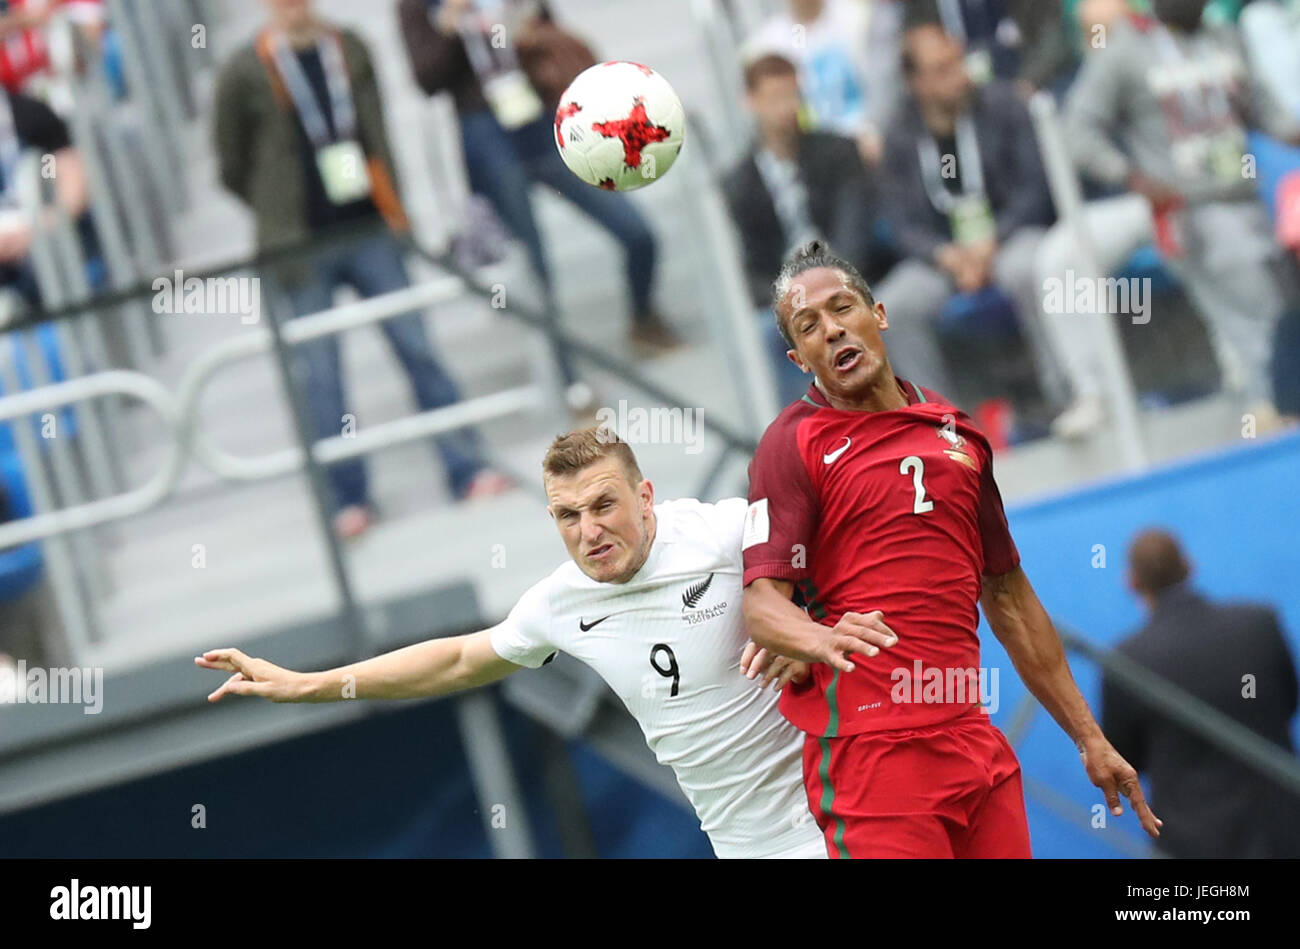 St. Petersburg, Russia. 24th June, 2017. Bruno Alves (R) of Portugal heads the ball with Chris Wood of New Zealand during the group A match between New Zealand and Portugal of the 2017 FIFA Confederations Cup in St. Petersburg, Russia, on June 24, 2017. Portugal won 4-0. Credit: Xu Zijian/Xinhua/Alamy Live News Stock Photo